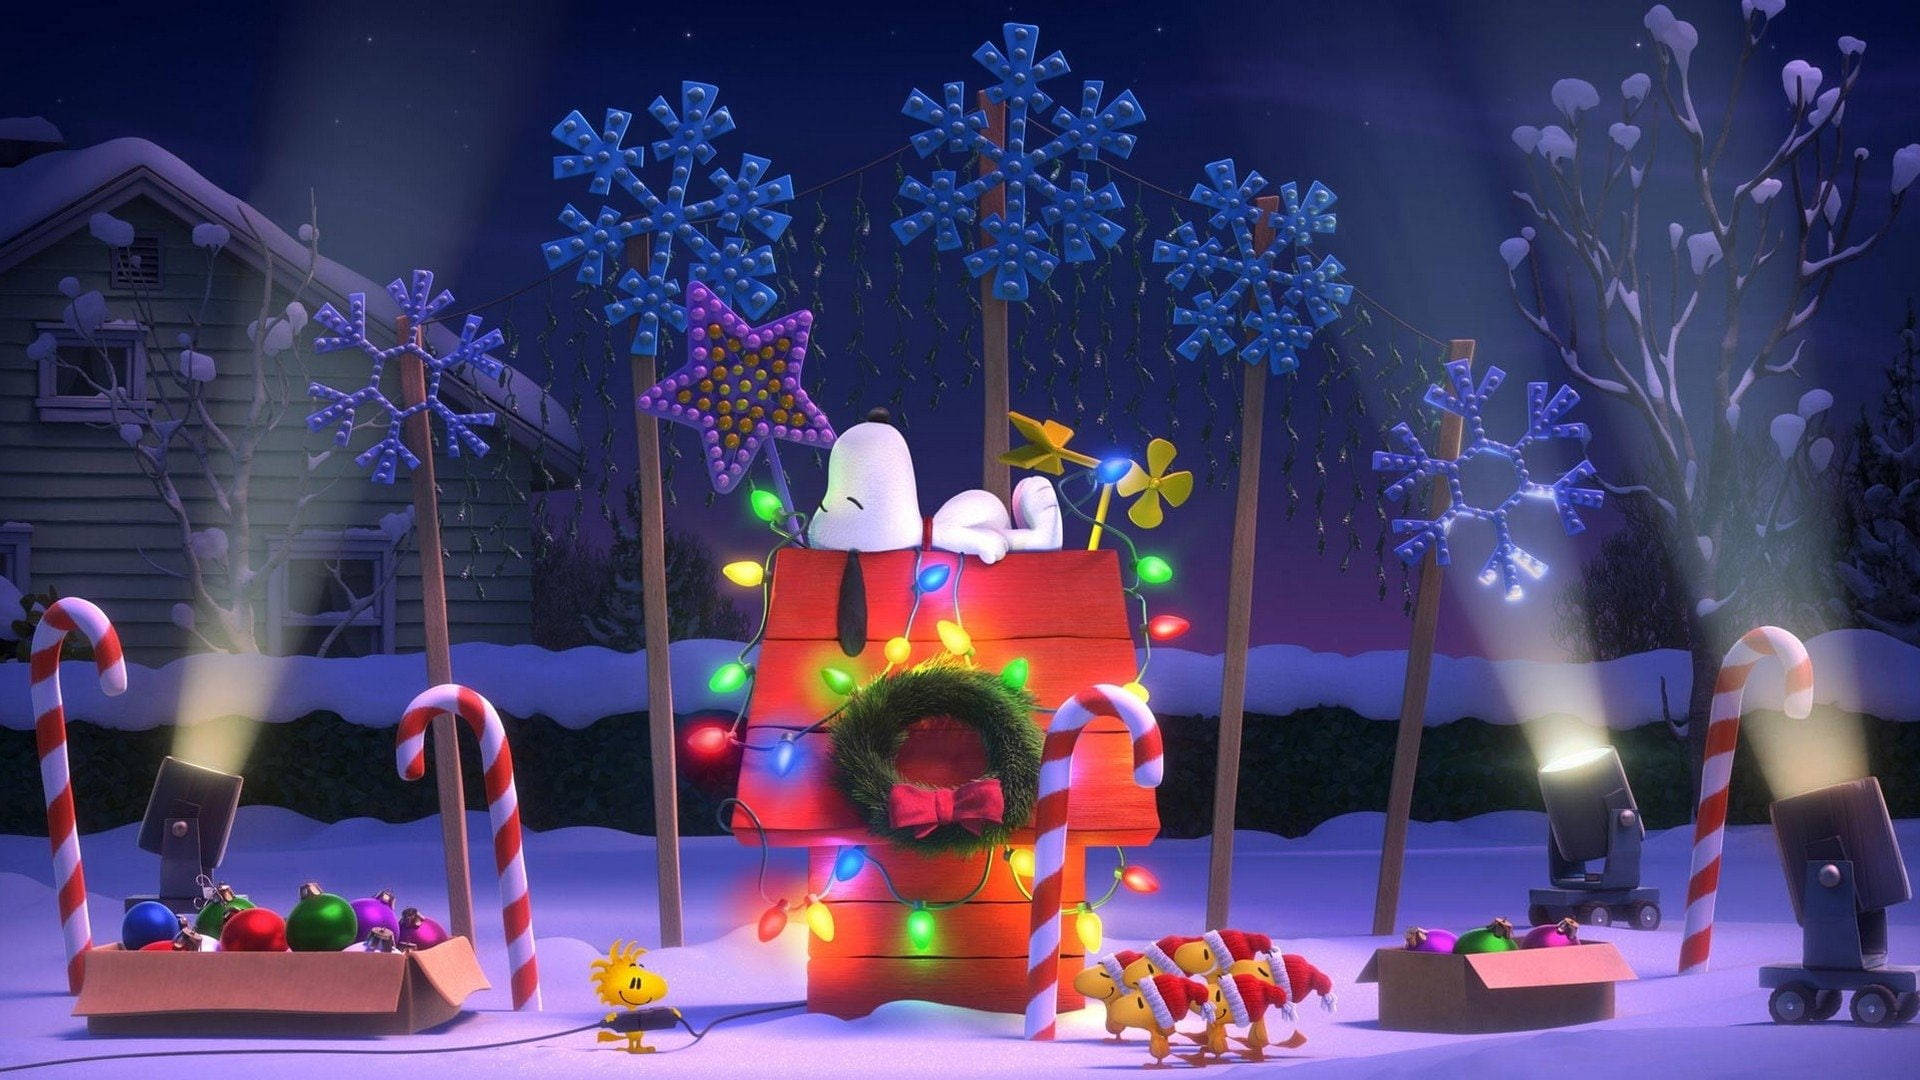 Peanuts Christmas Decorations Background